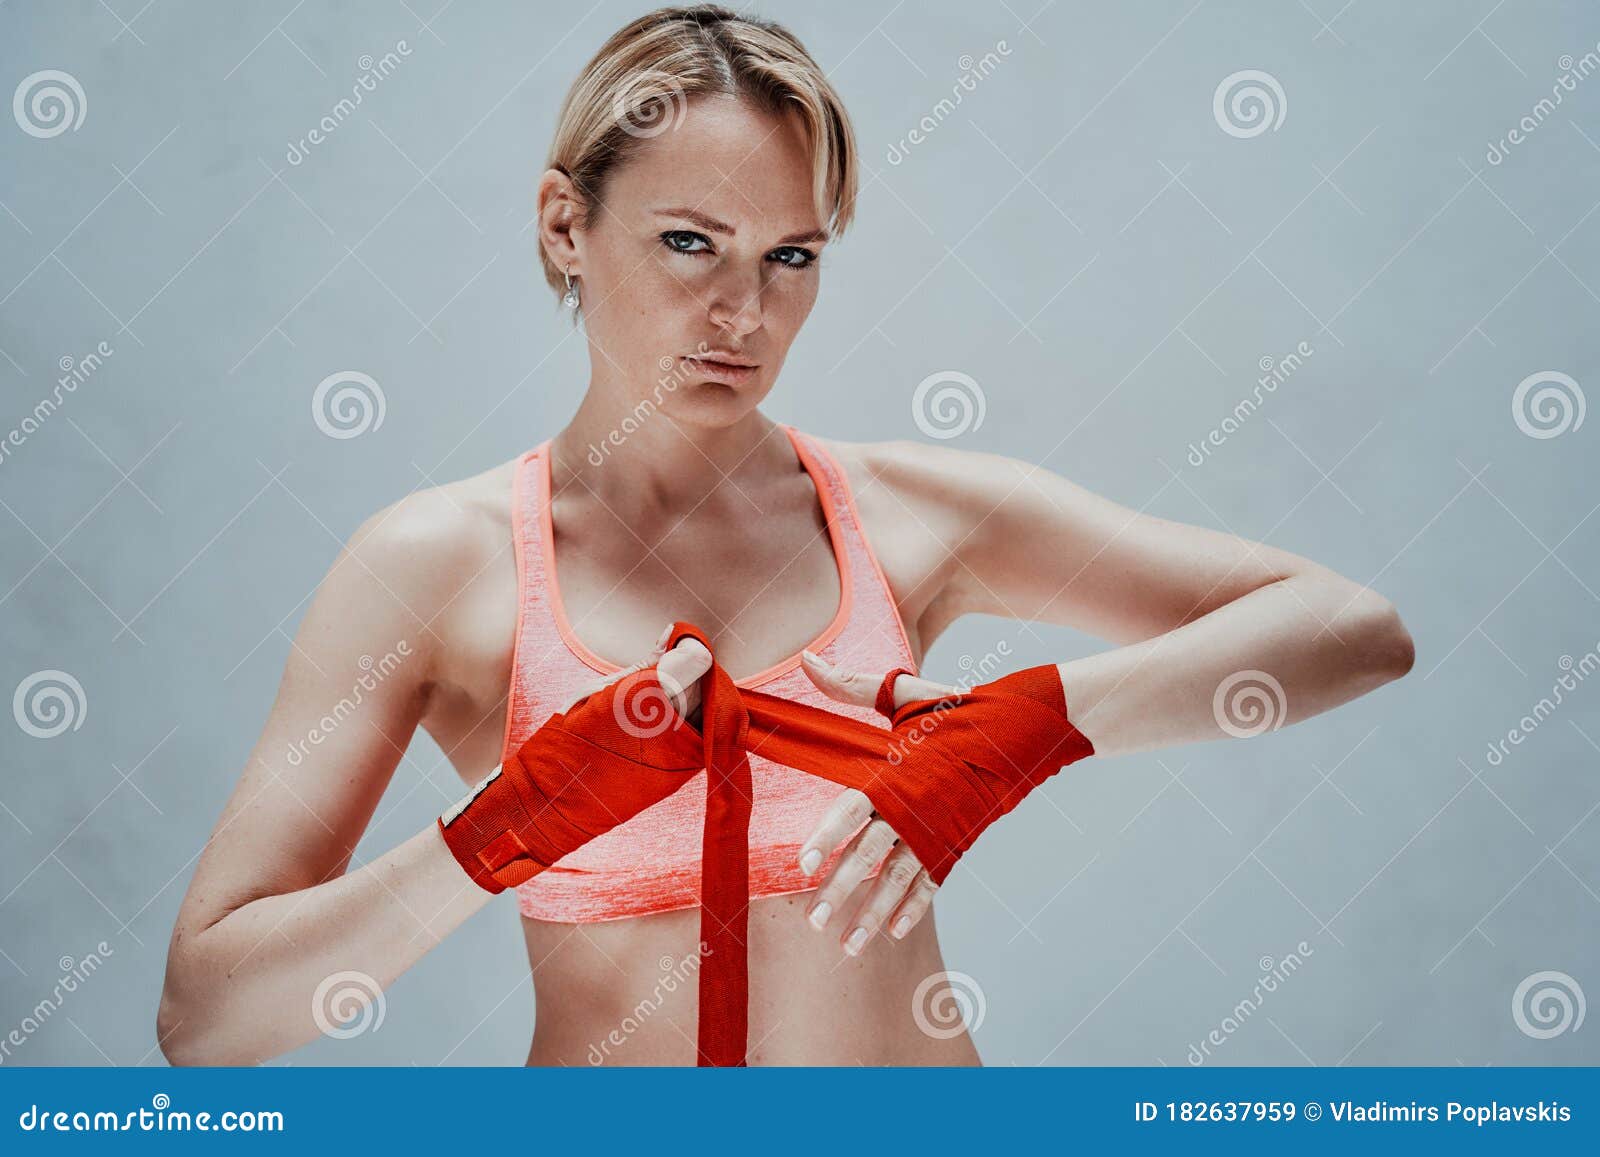 750 Bandage Bra Royalty-Free Images, Stock Photos & Pictures